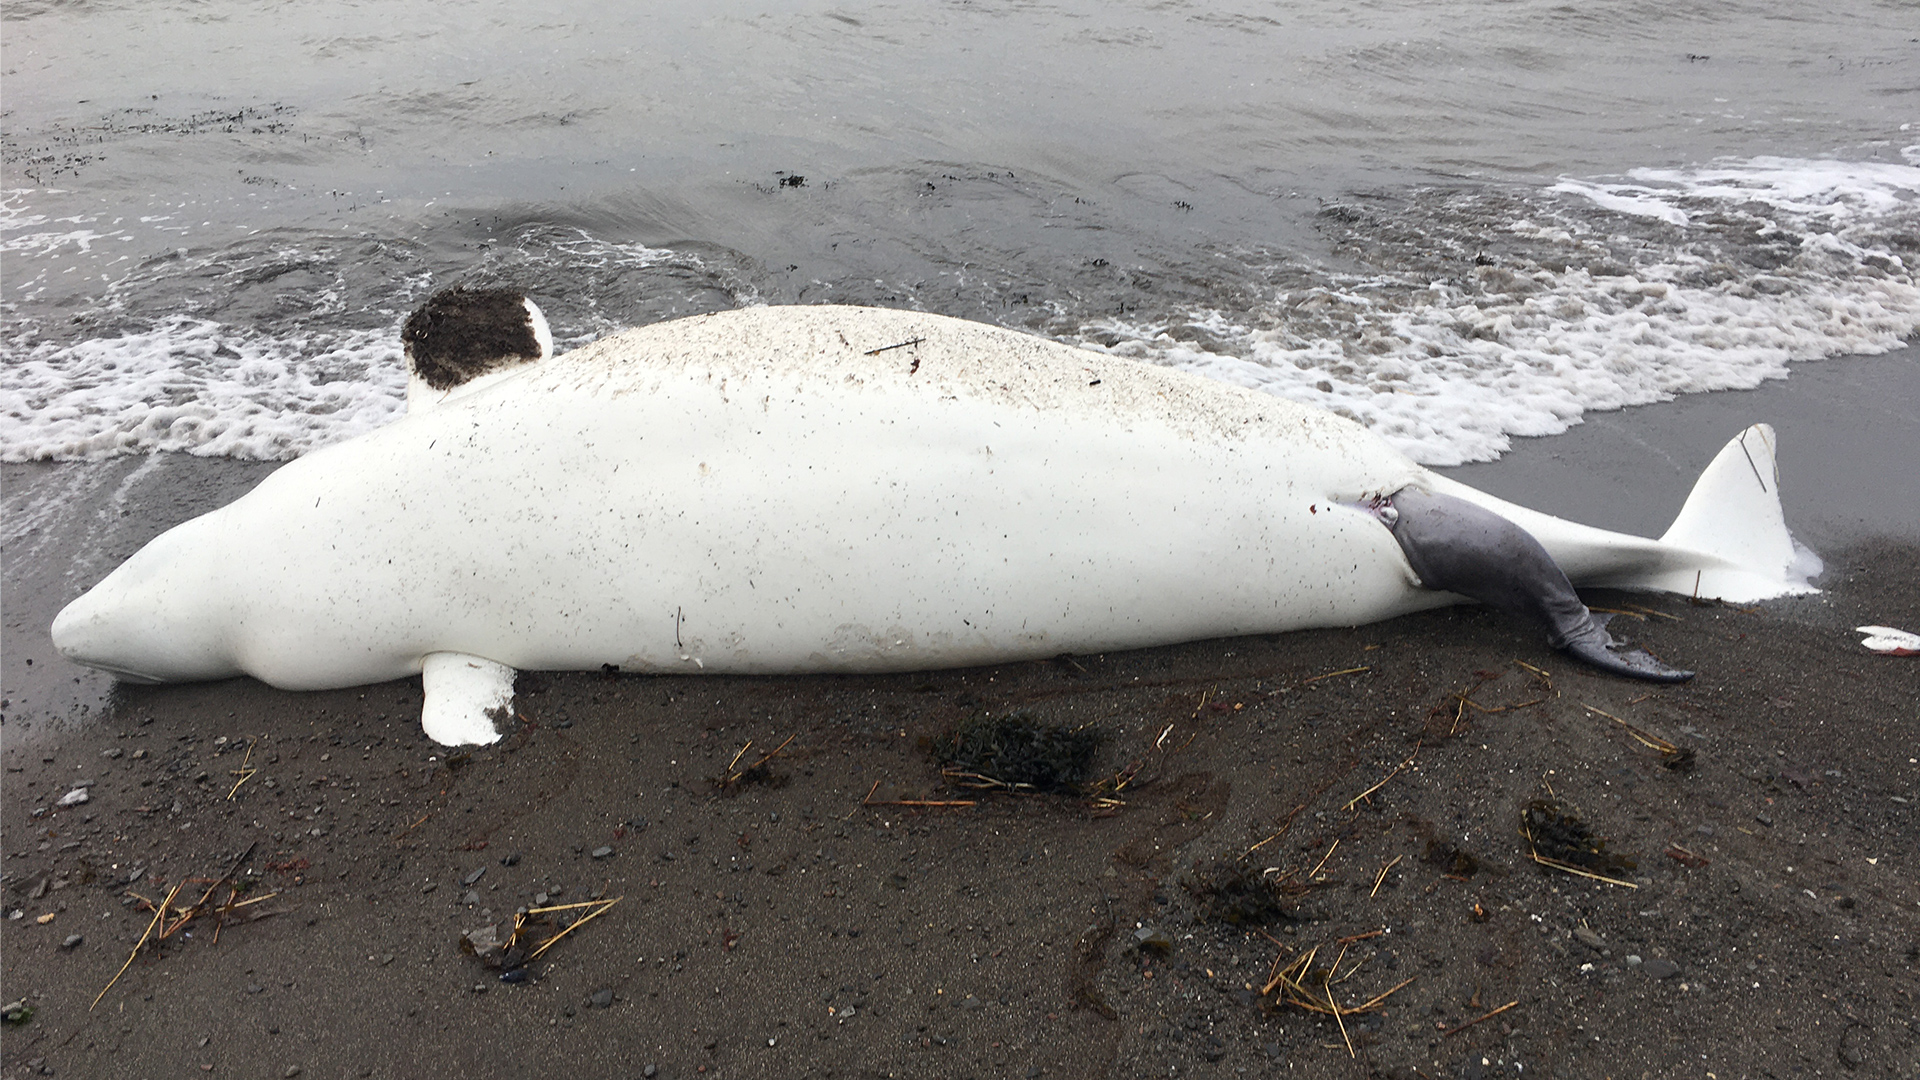 A beluga carcass washed up on the beach. The tail of the calf that was being born is sticking out of the genital slit.